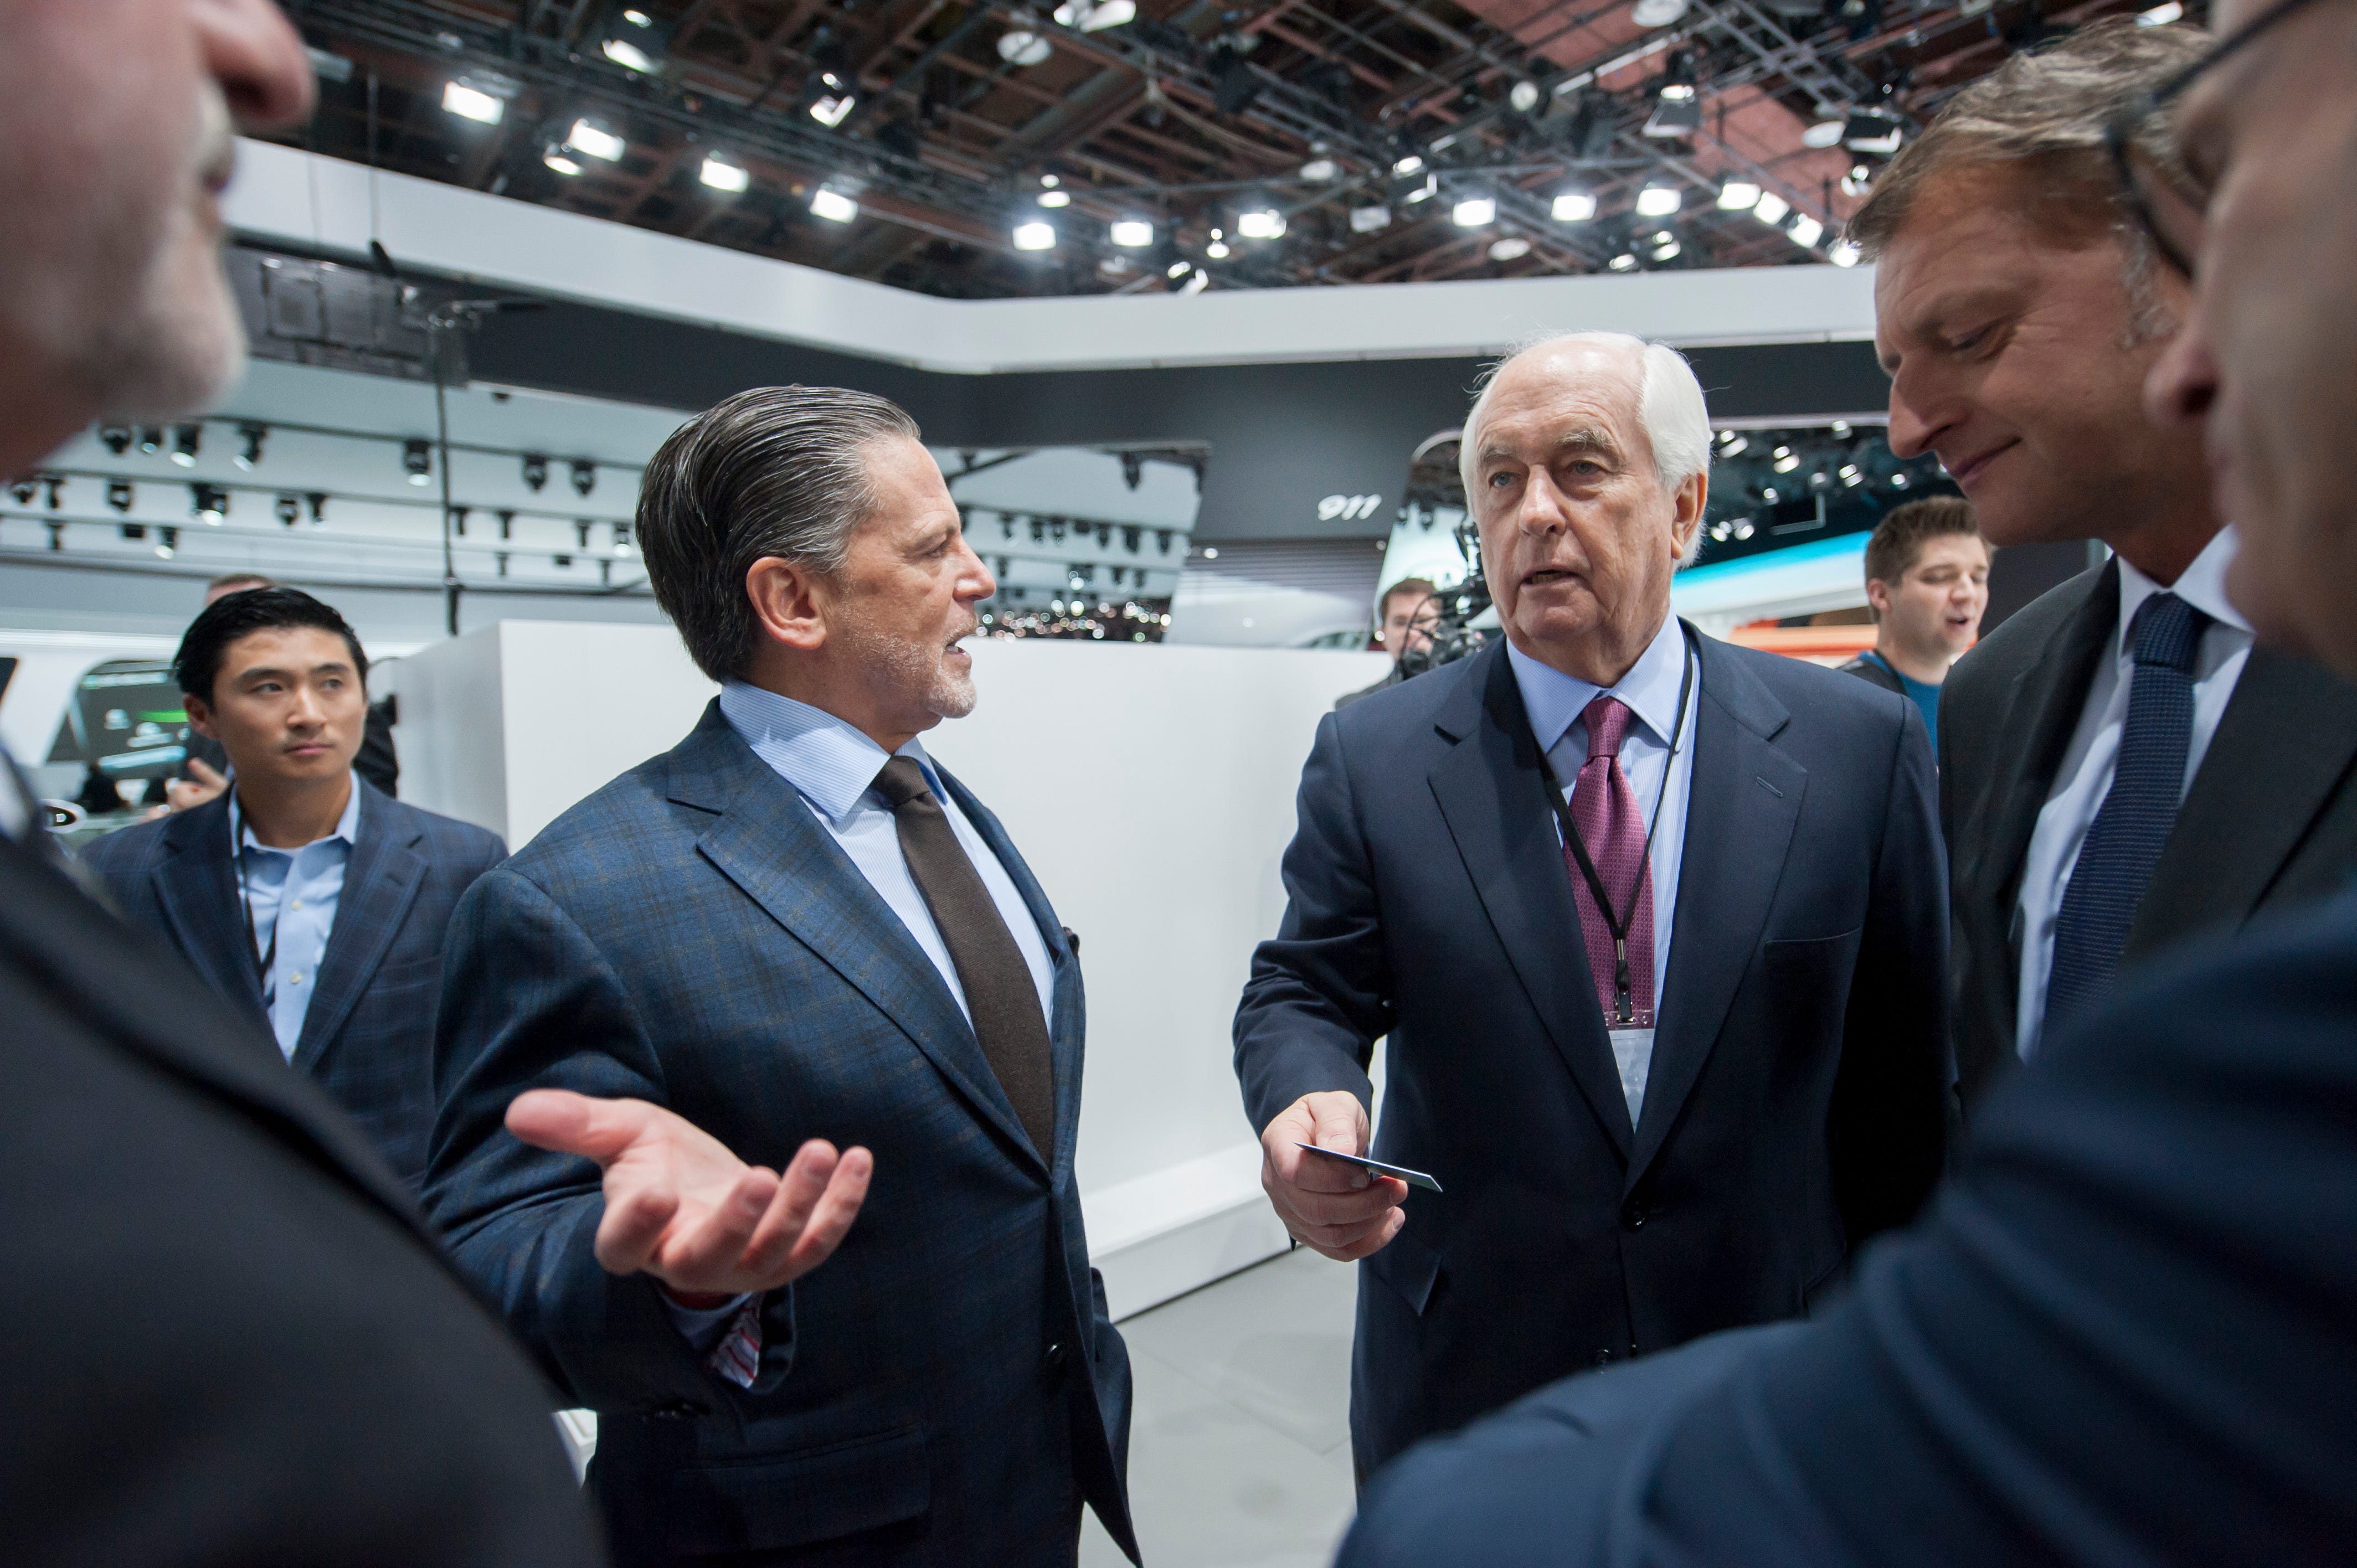 Dan Gilbert, left, and Roger Penske chat on the main floor during the North American International Auto Show at Cobo Hall in Detroit January 12, 2015.